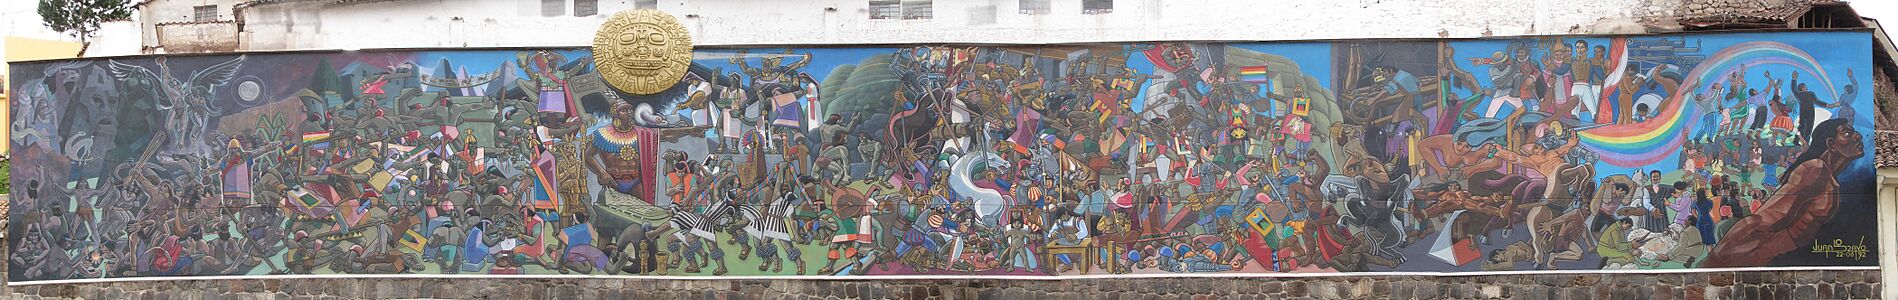 Mural of the History of Cusco by Juan Bravo for the Municipality of Cusco